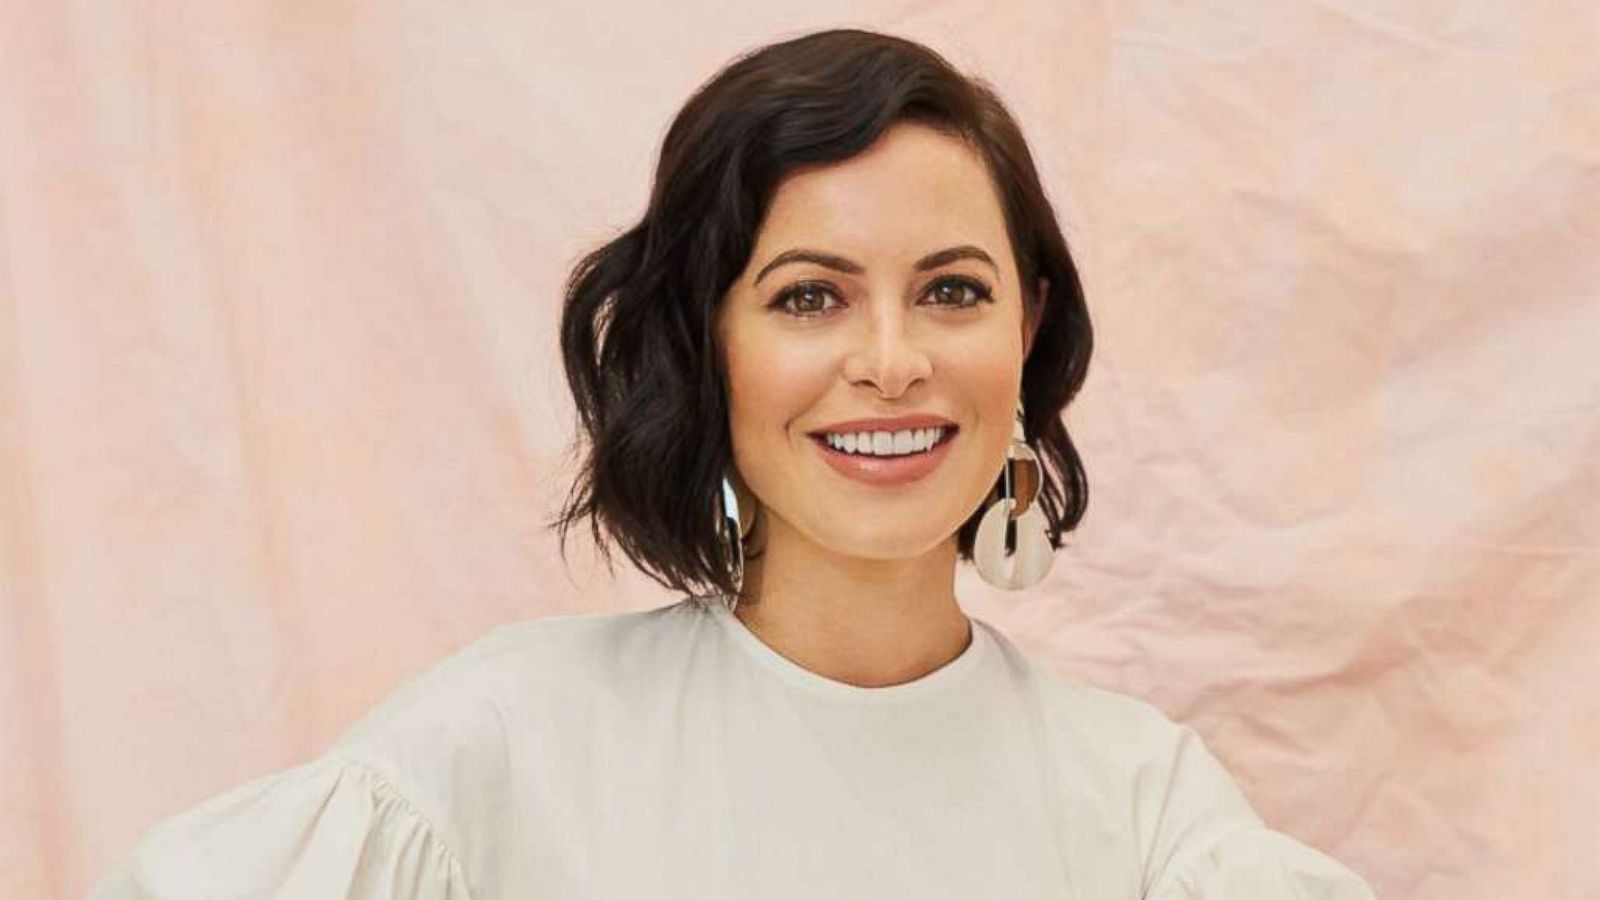 Nasty Gal's Sophia Amoruso on Why She Stepped Down - Women In